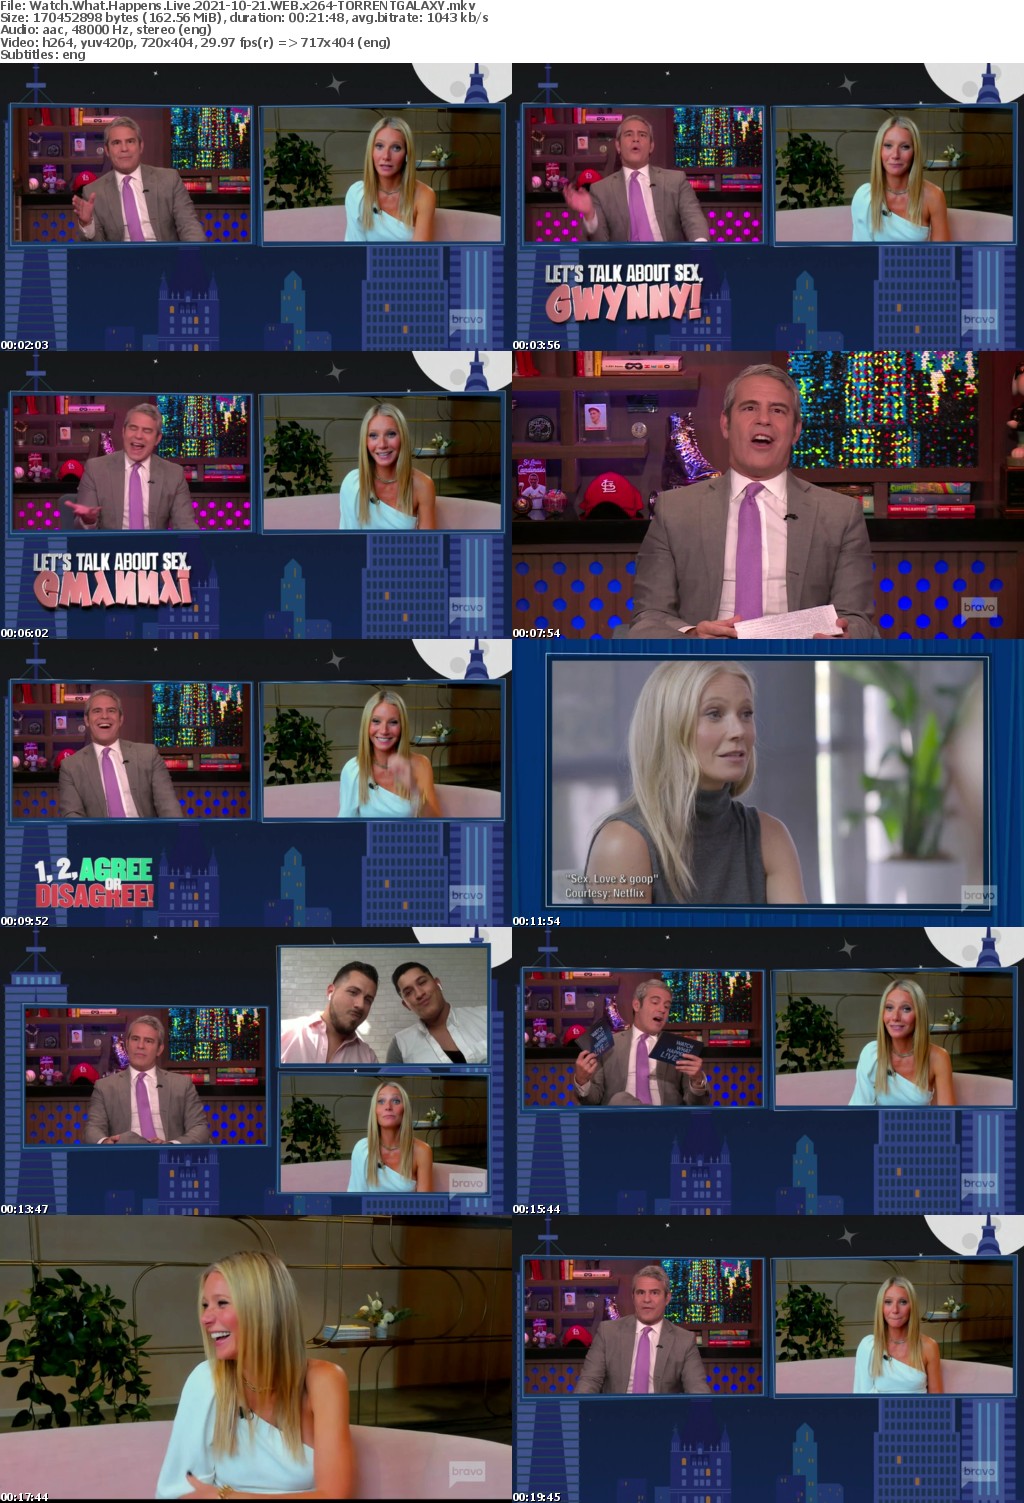 Watch What Happens Live 2021-10-21 WEB x264-GALAXY